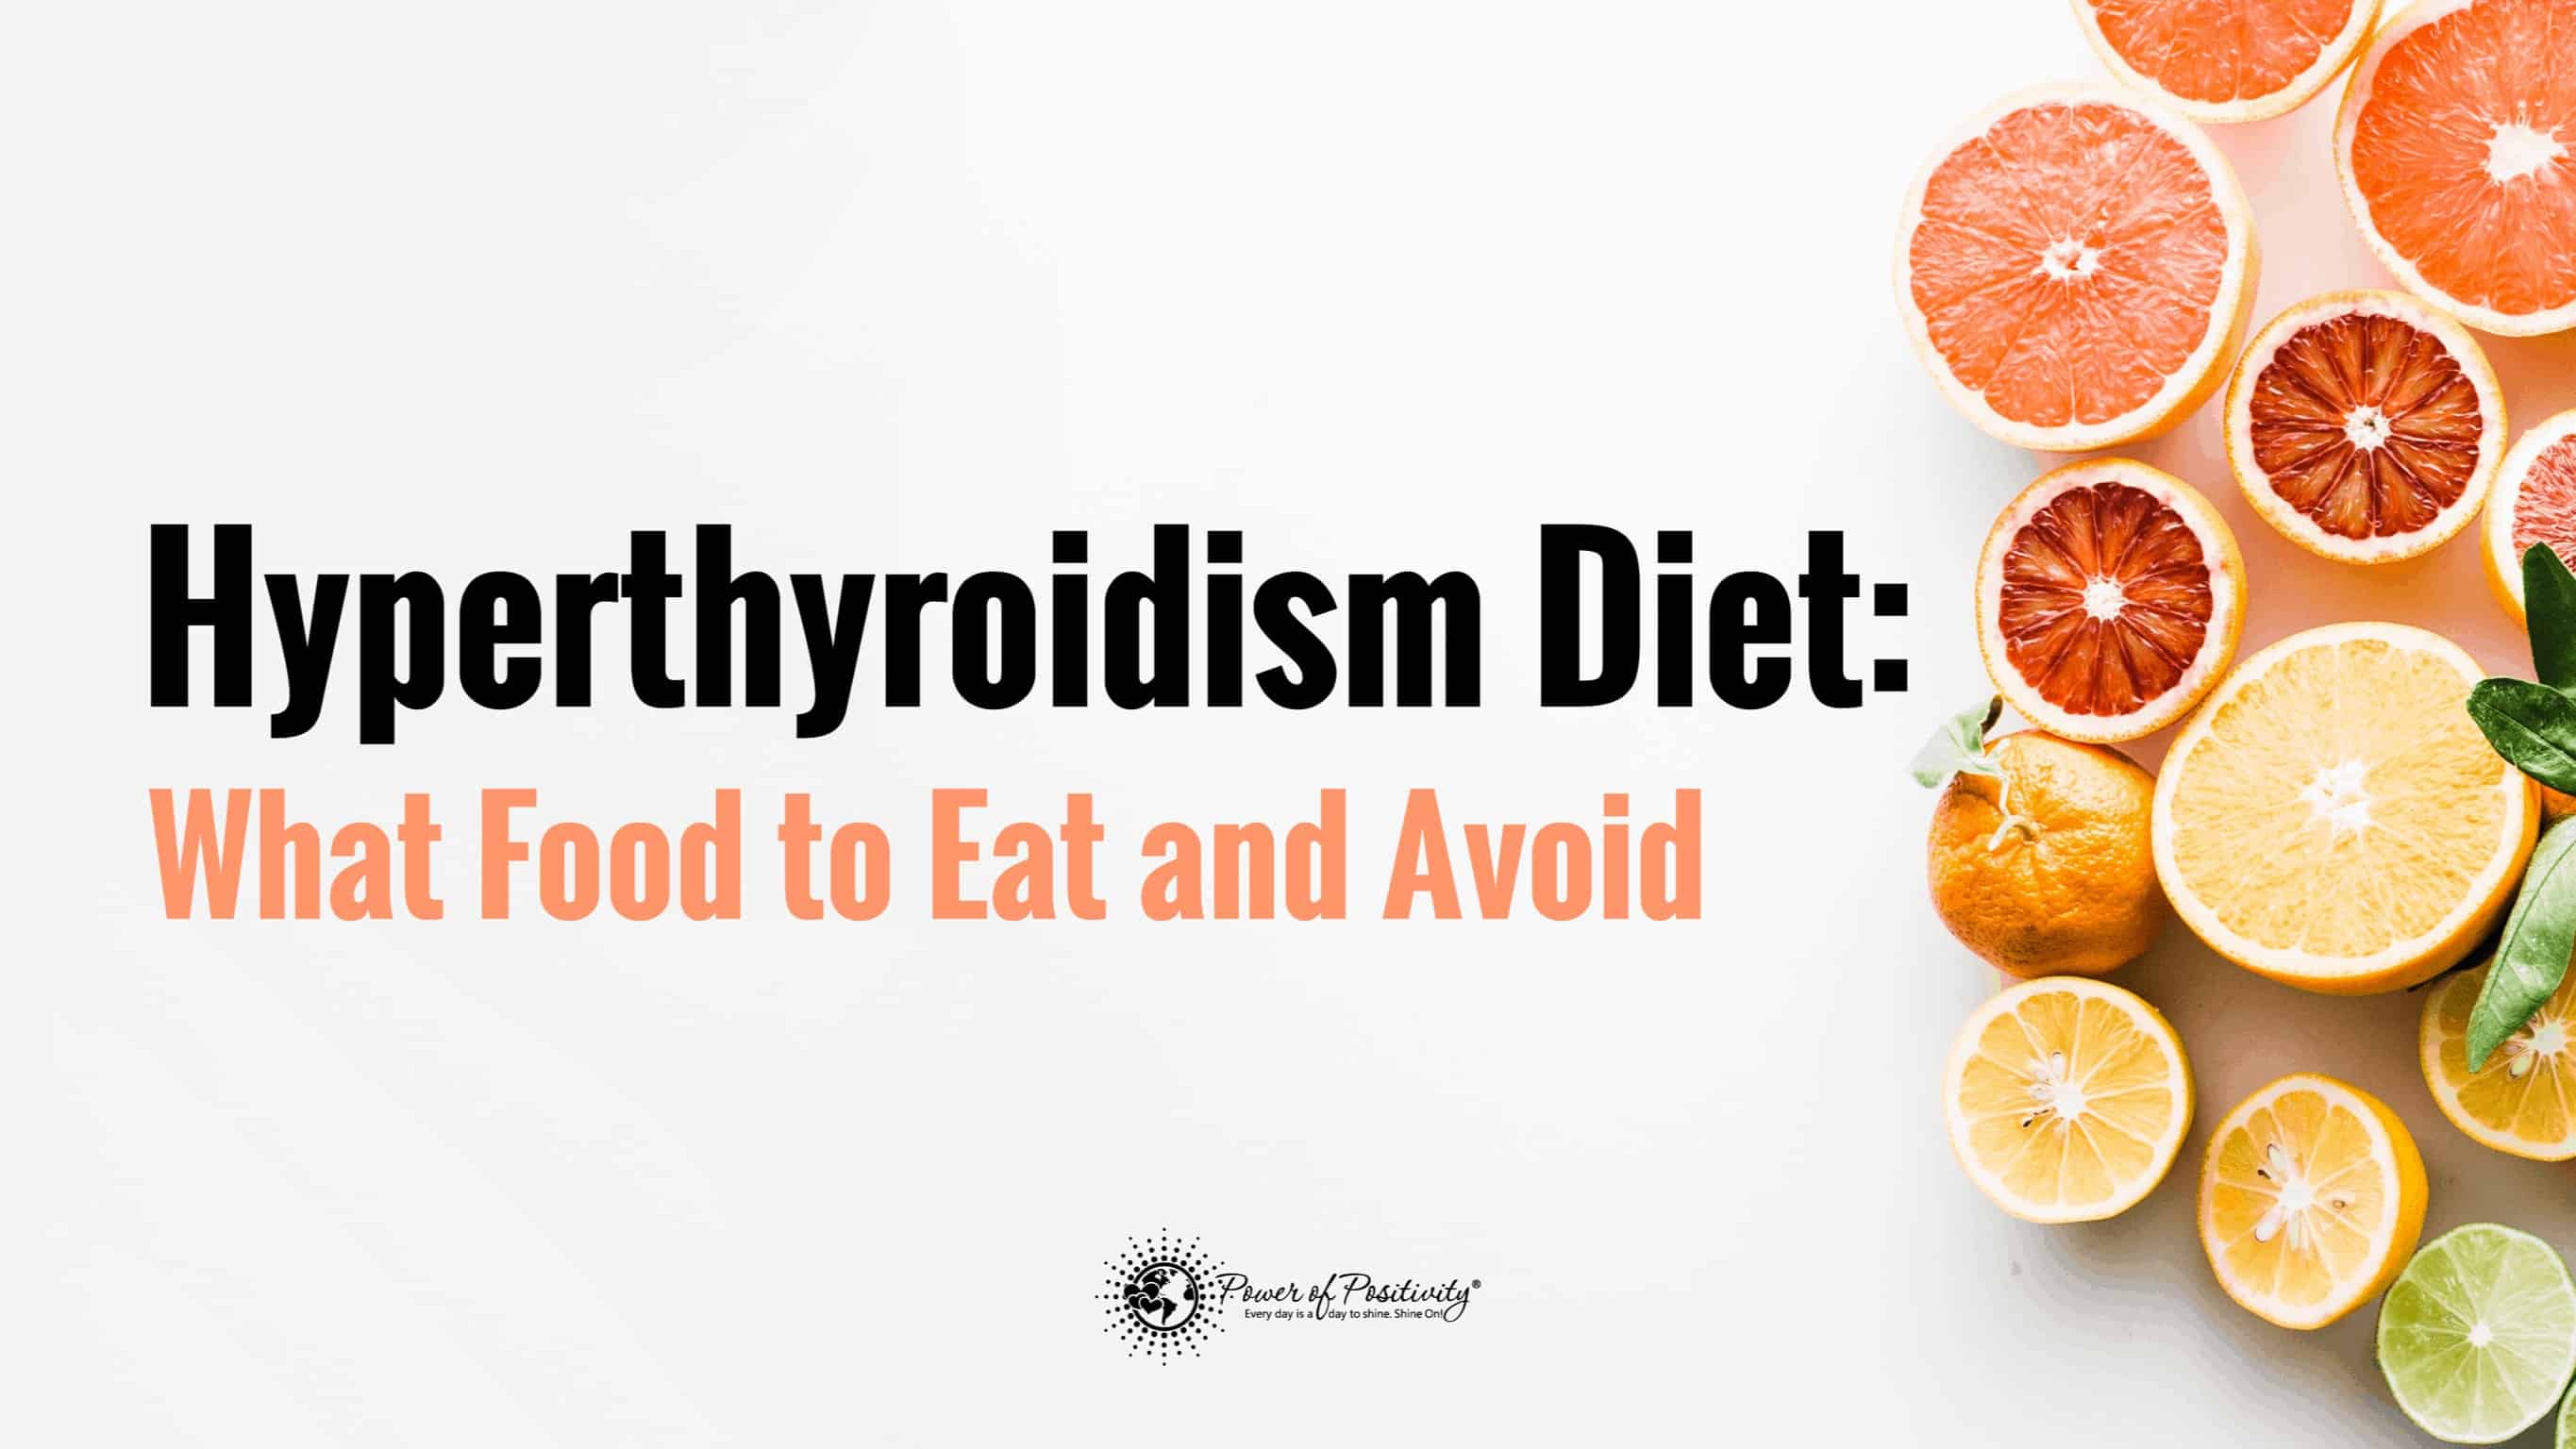 Hyperthyroidism Diet: What Foods to Eat and Avoid